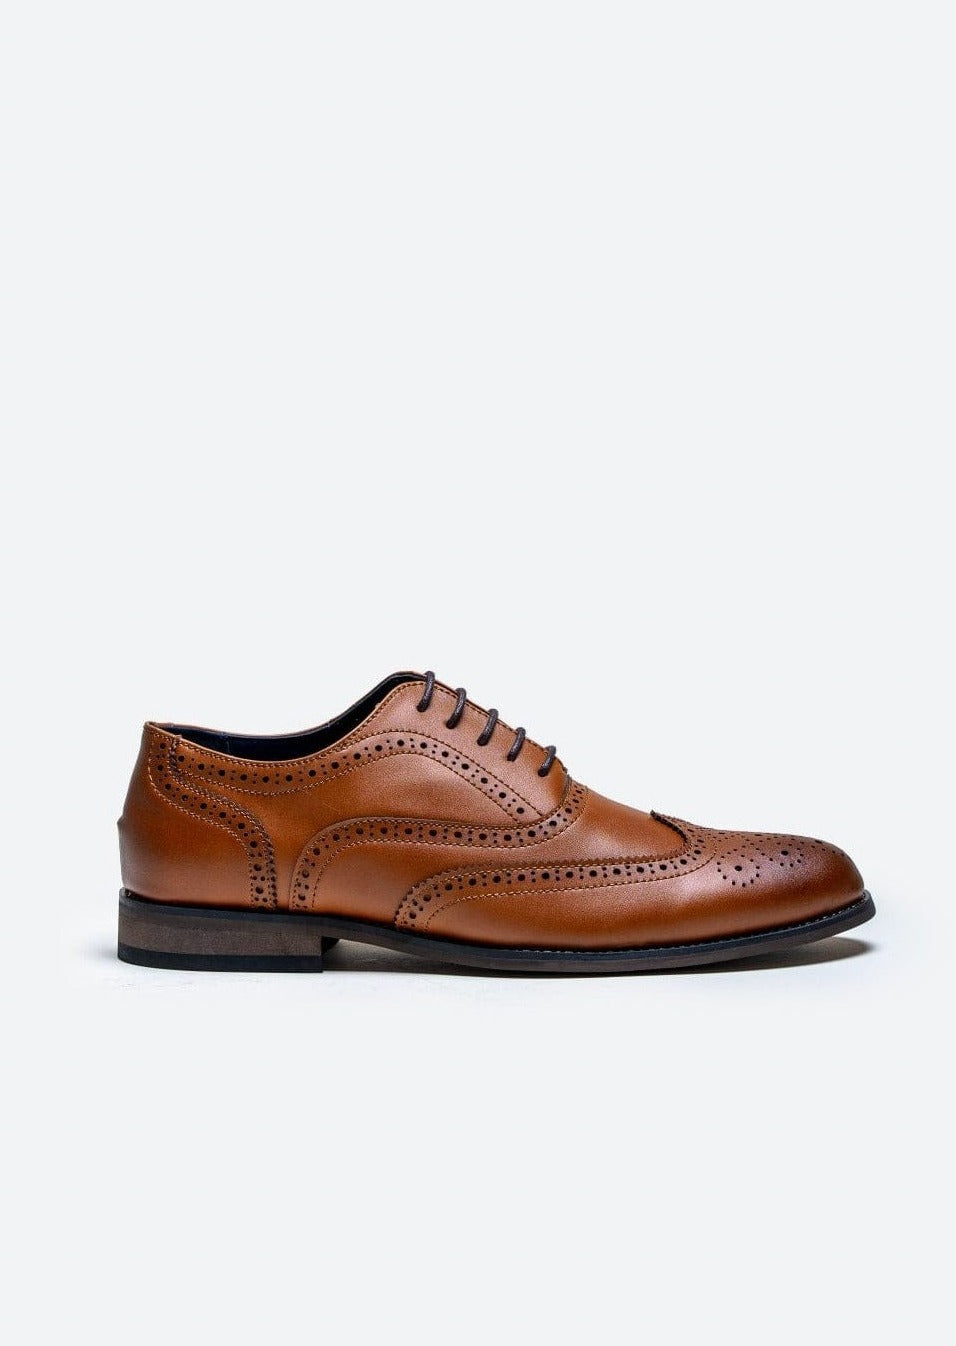 CLARK TAN LEATHER BROGUE SHOES